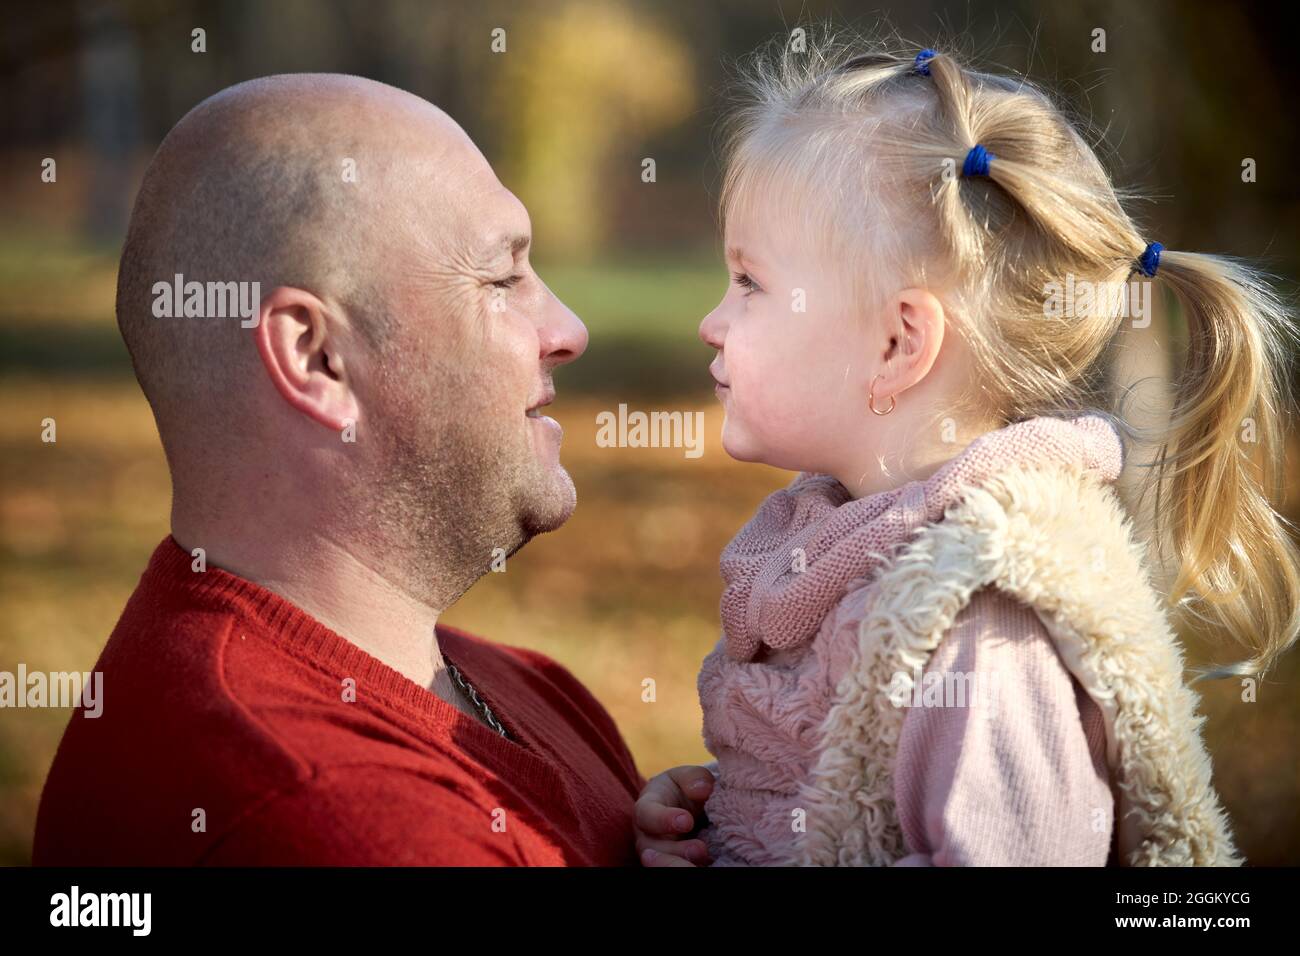 Scene of quiet family happiness filiation and love. Happy caucasian father and his little daughter face to face closely looking into each others eyes Stock Photo